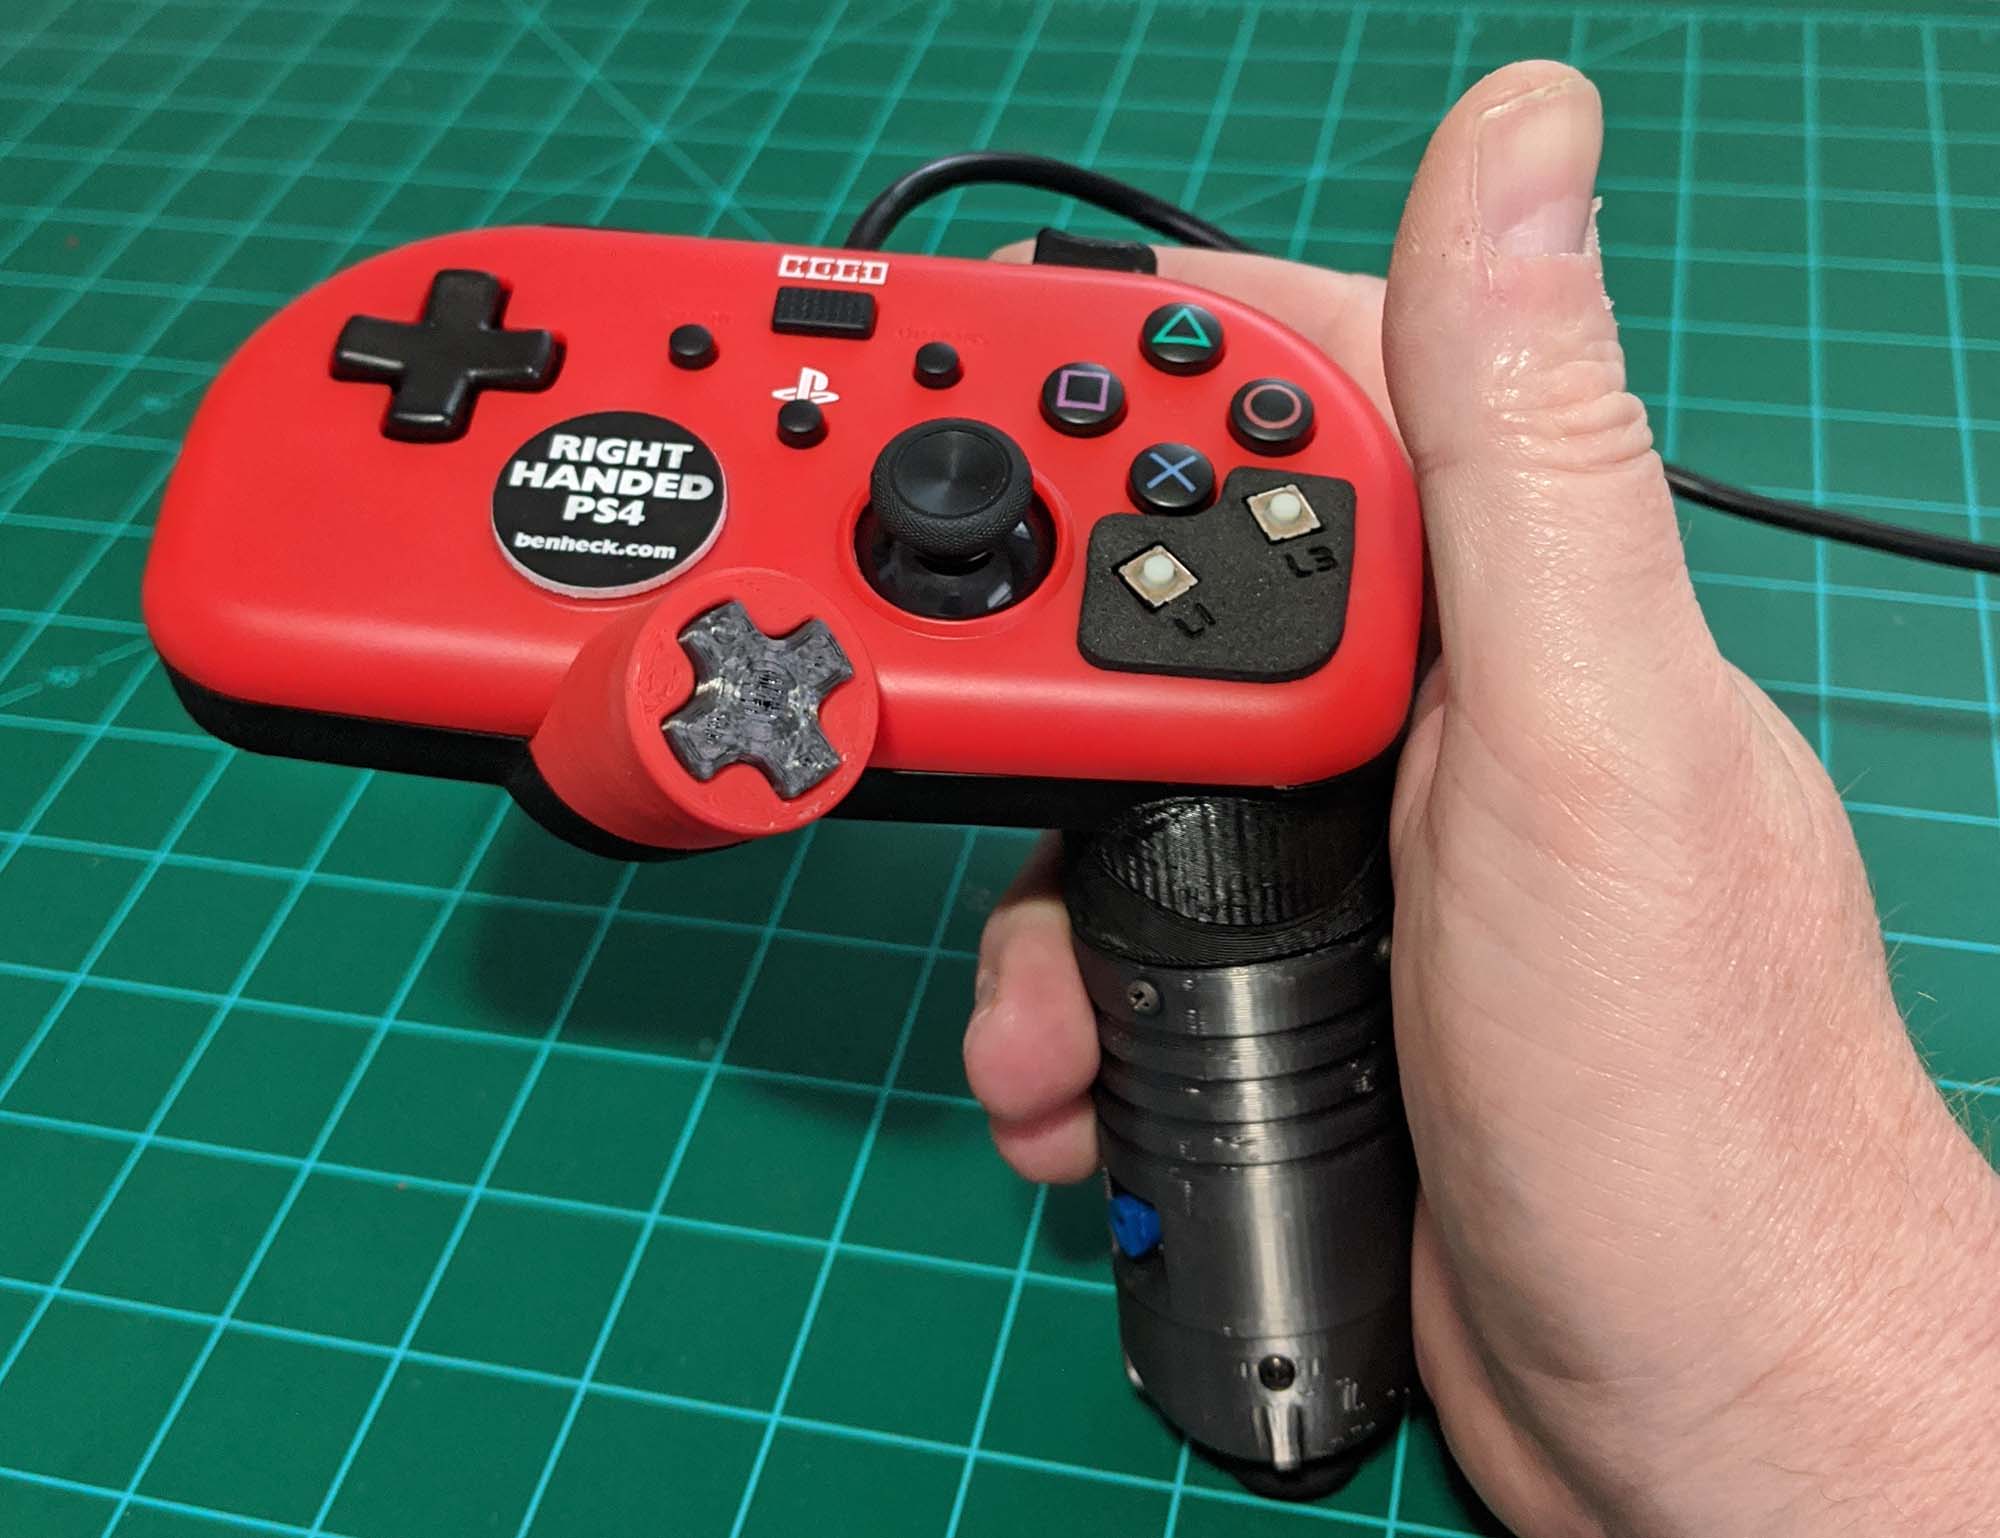 Right handed version of the controller